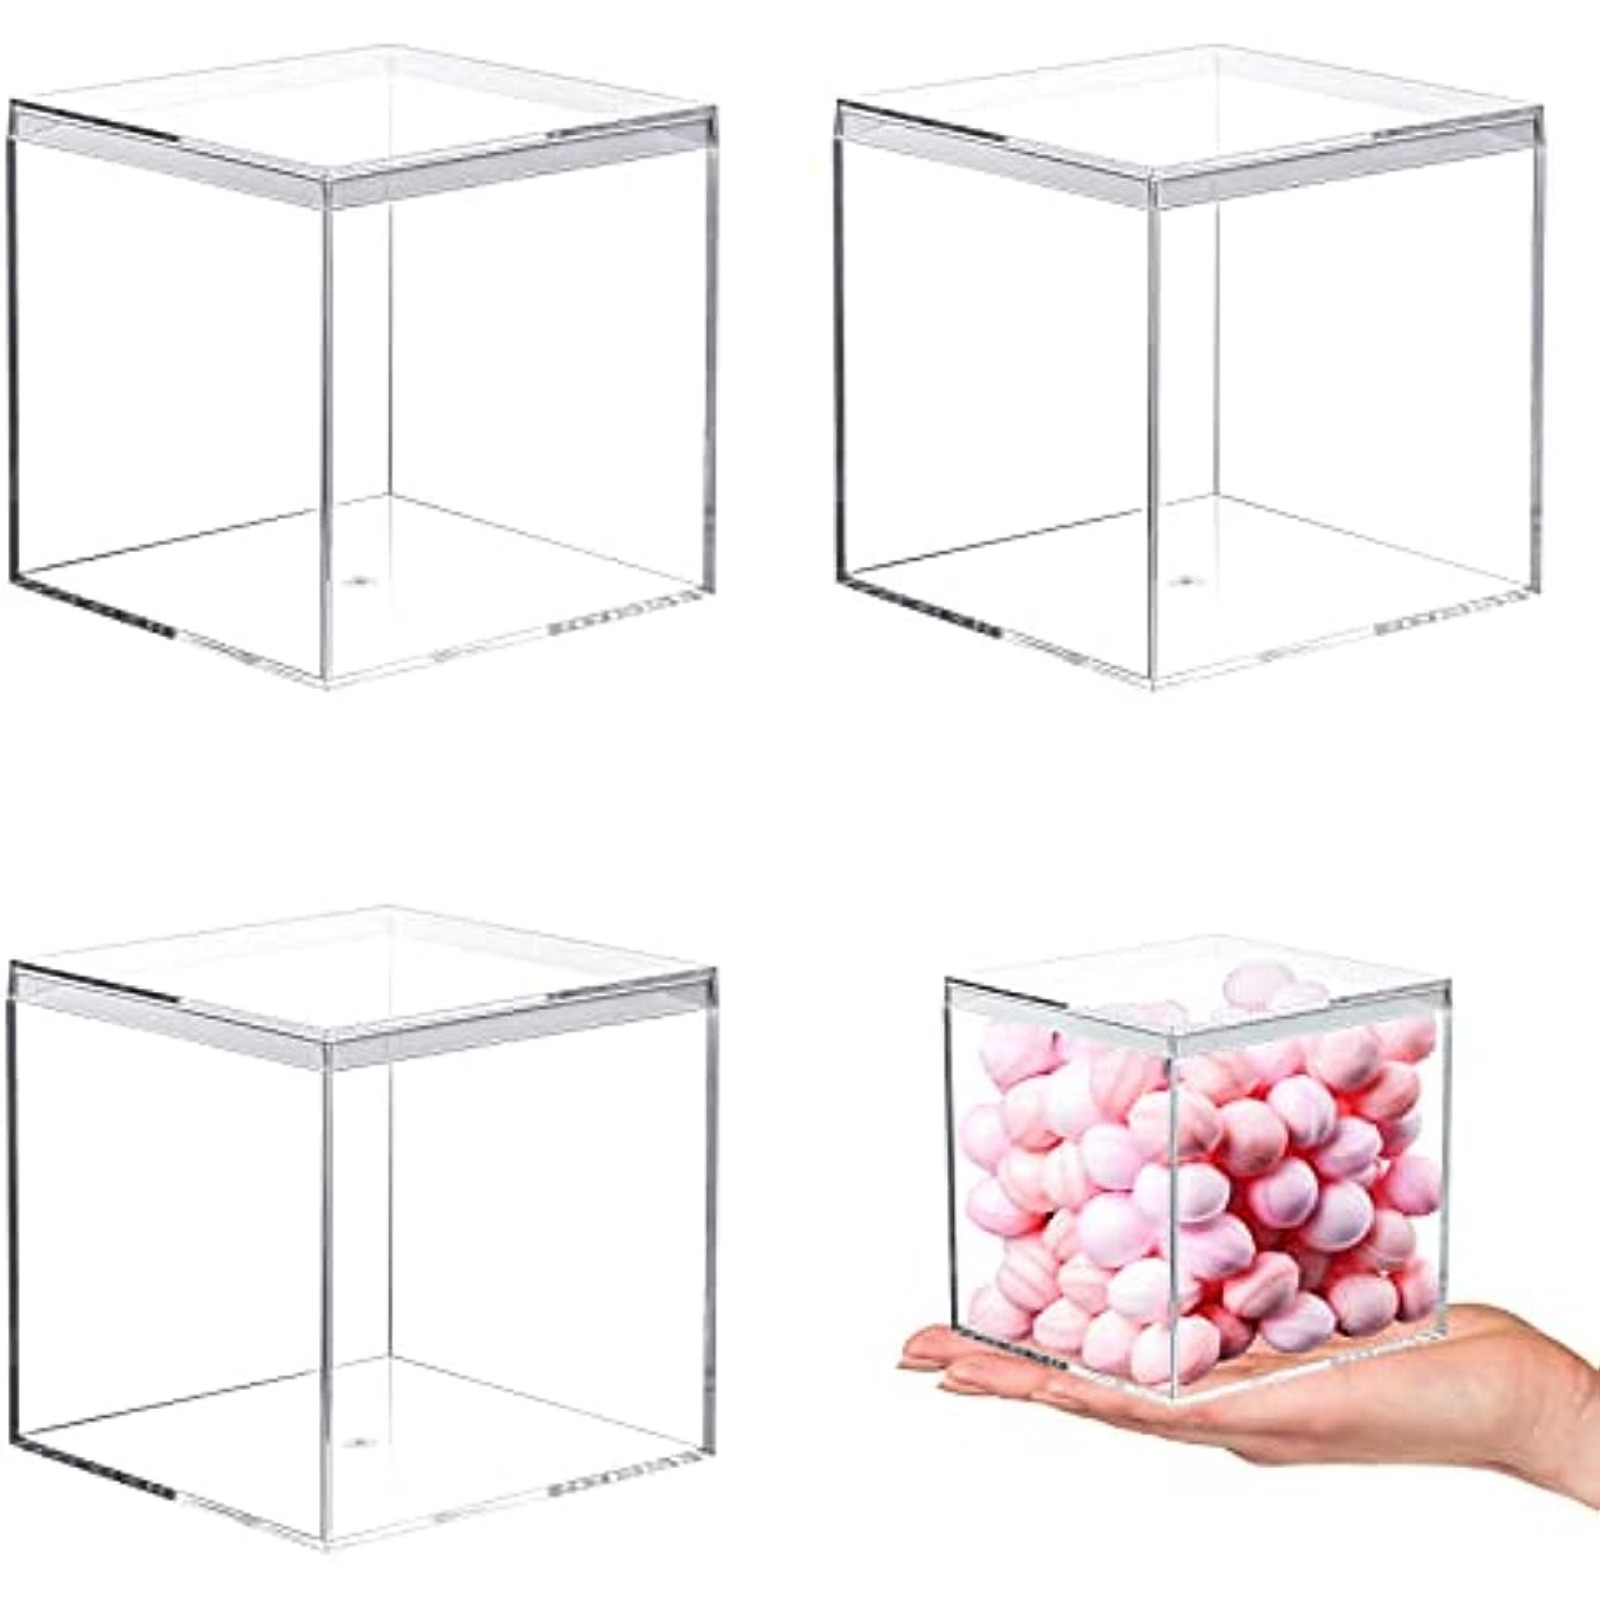 Clear Acrylic Box with Lid , 4 Pack Small Acrylic Box with Lid Plastic Square Cube Small Container ,Storage Boxes Organizer Containers for Candy Pill